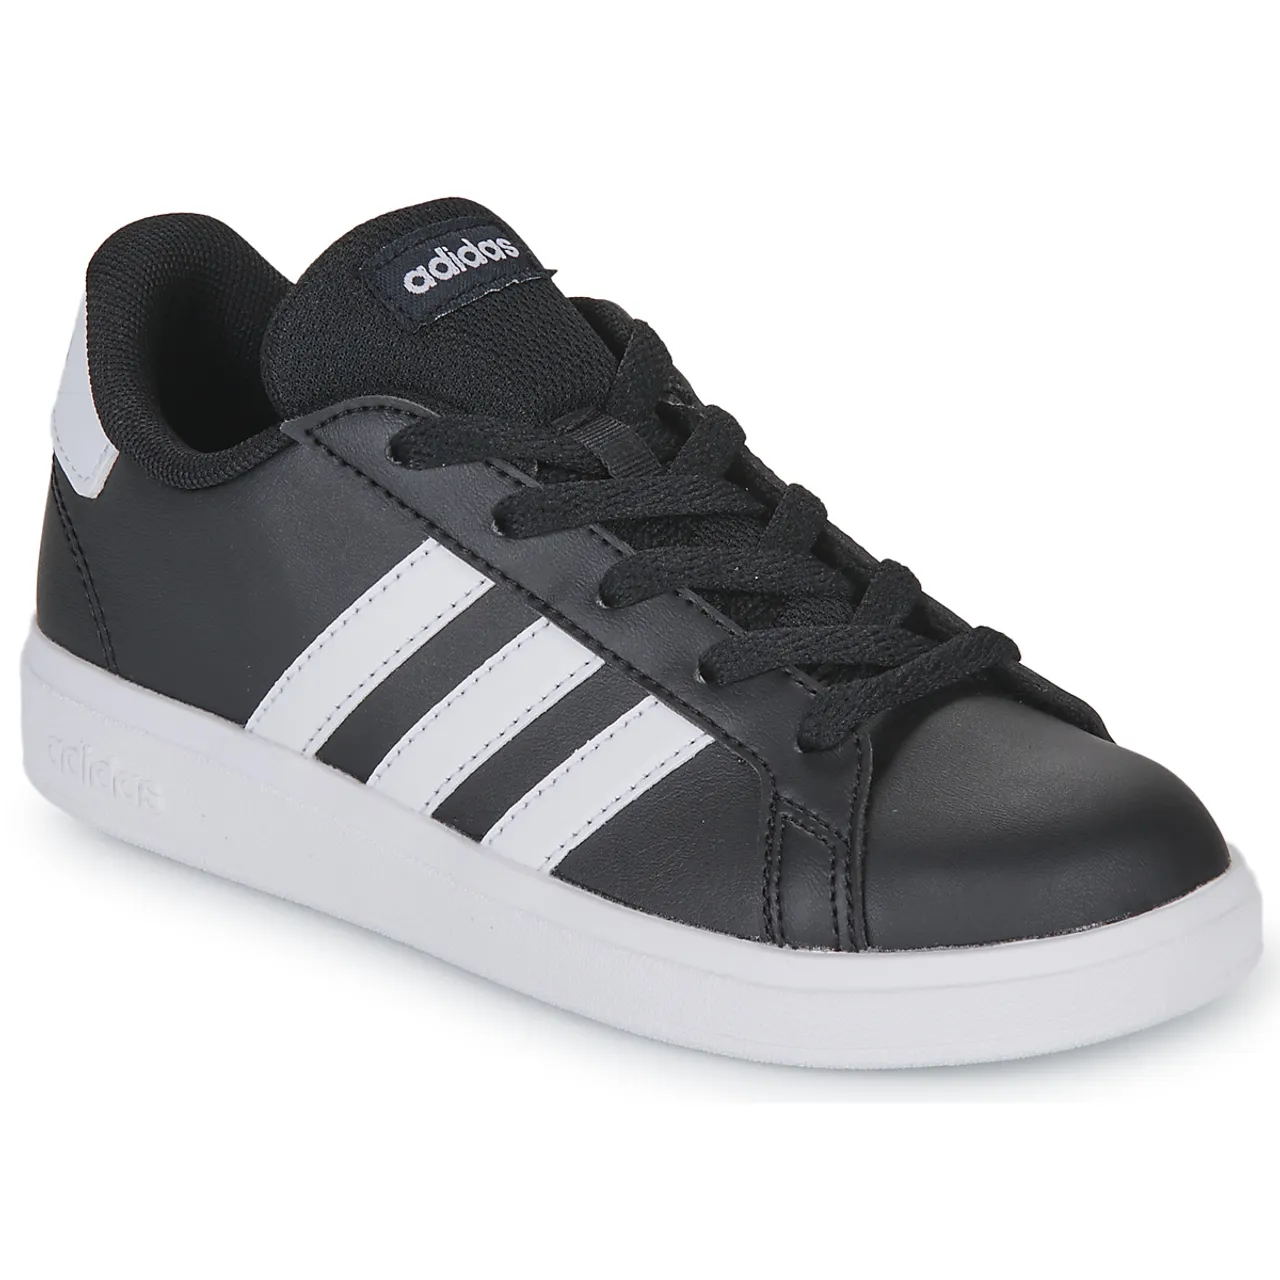 adidas  GRAND COURT 2.0 K  boys's Children's Shoes (Trainers) in Black